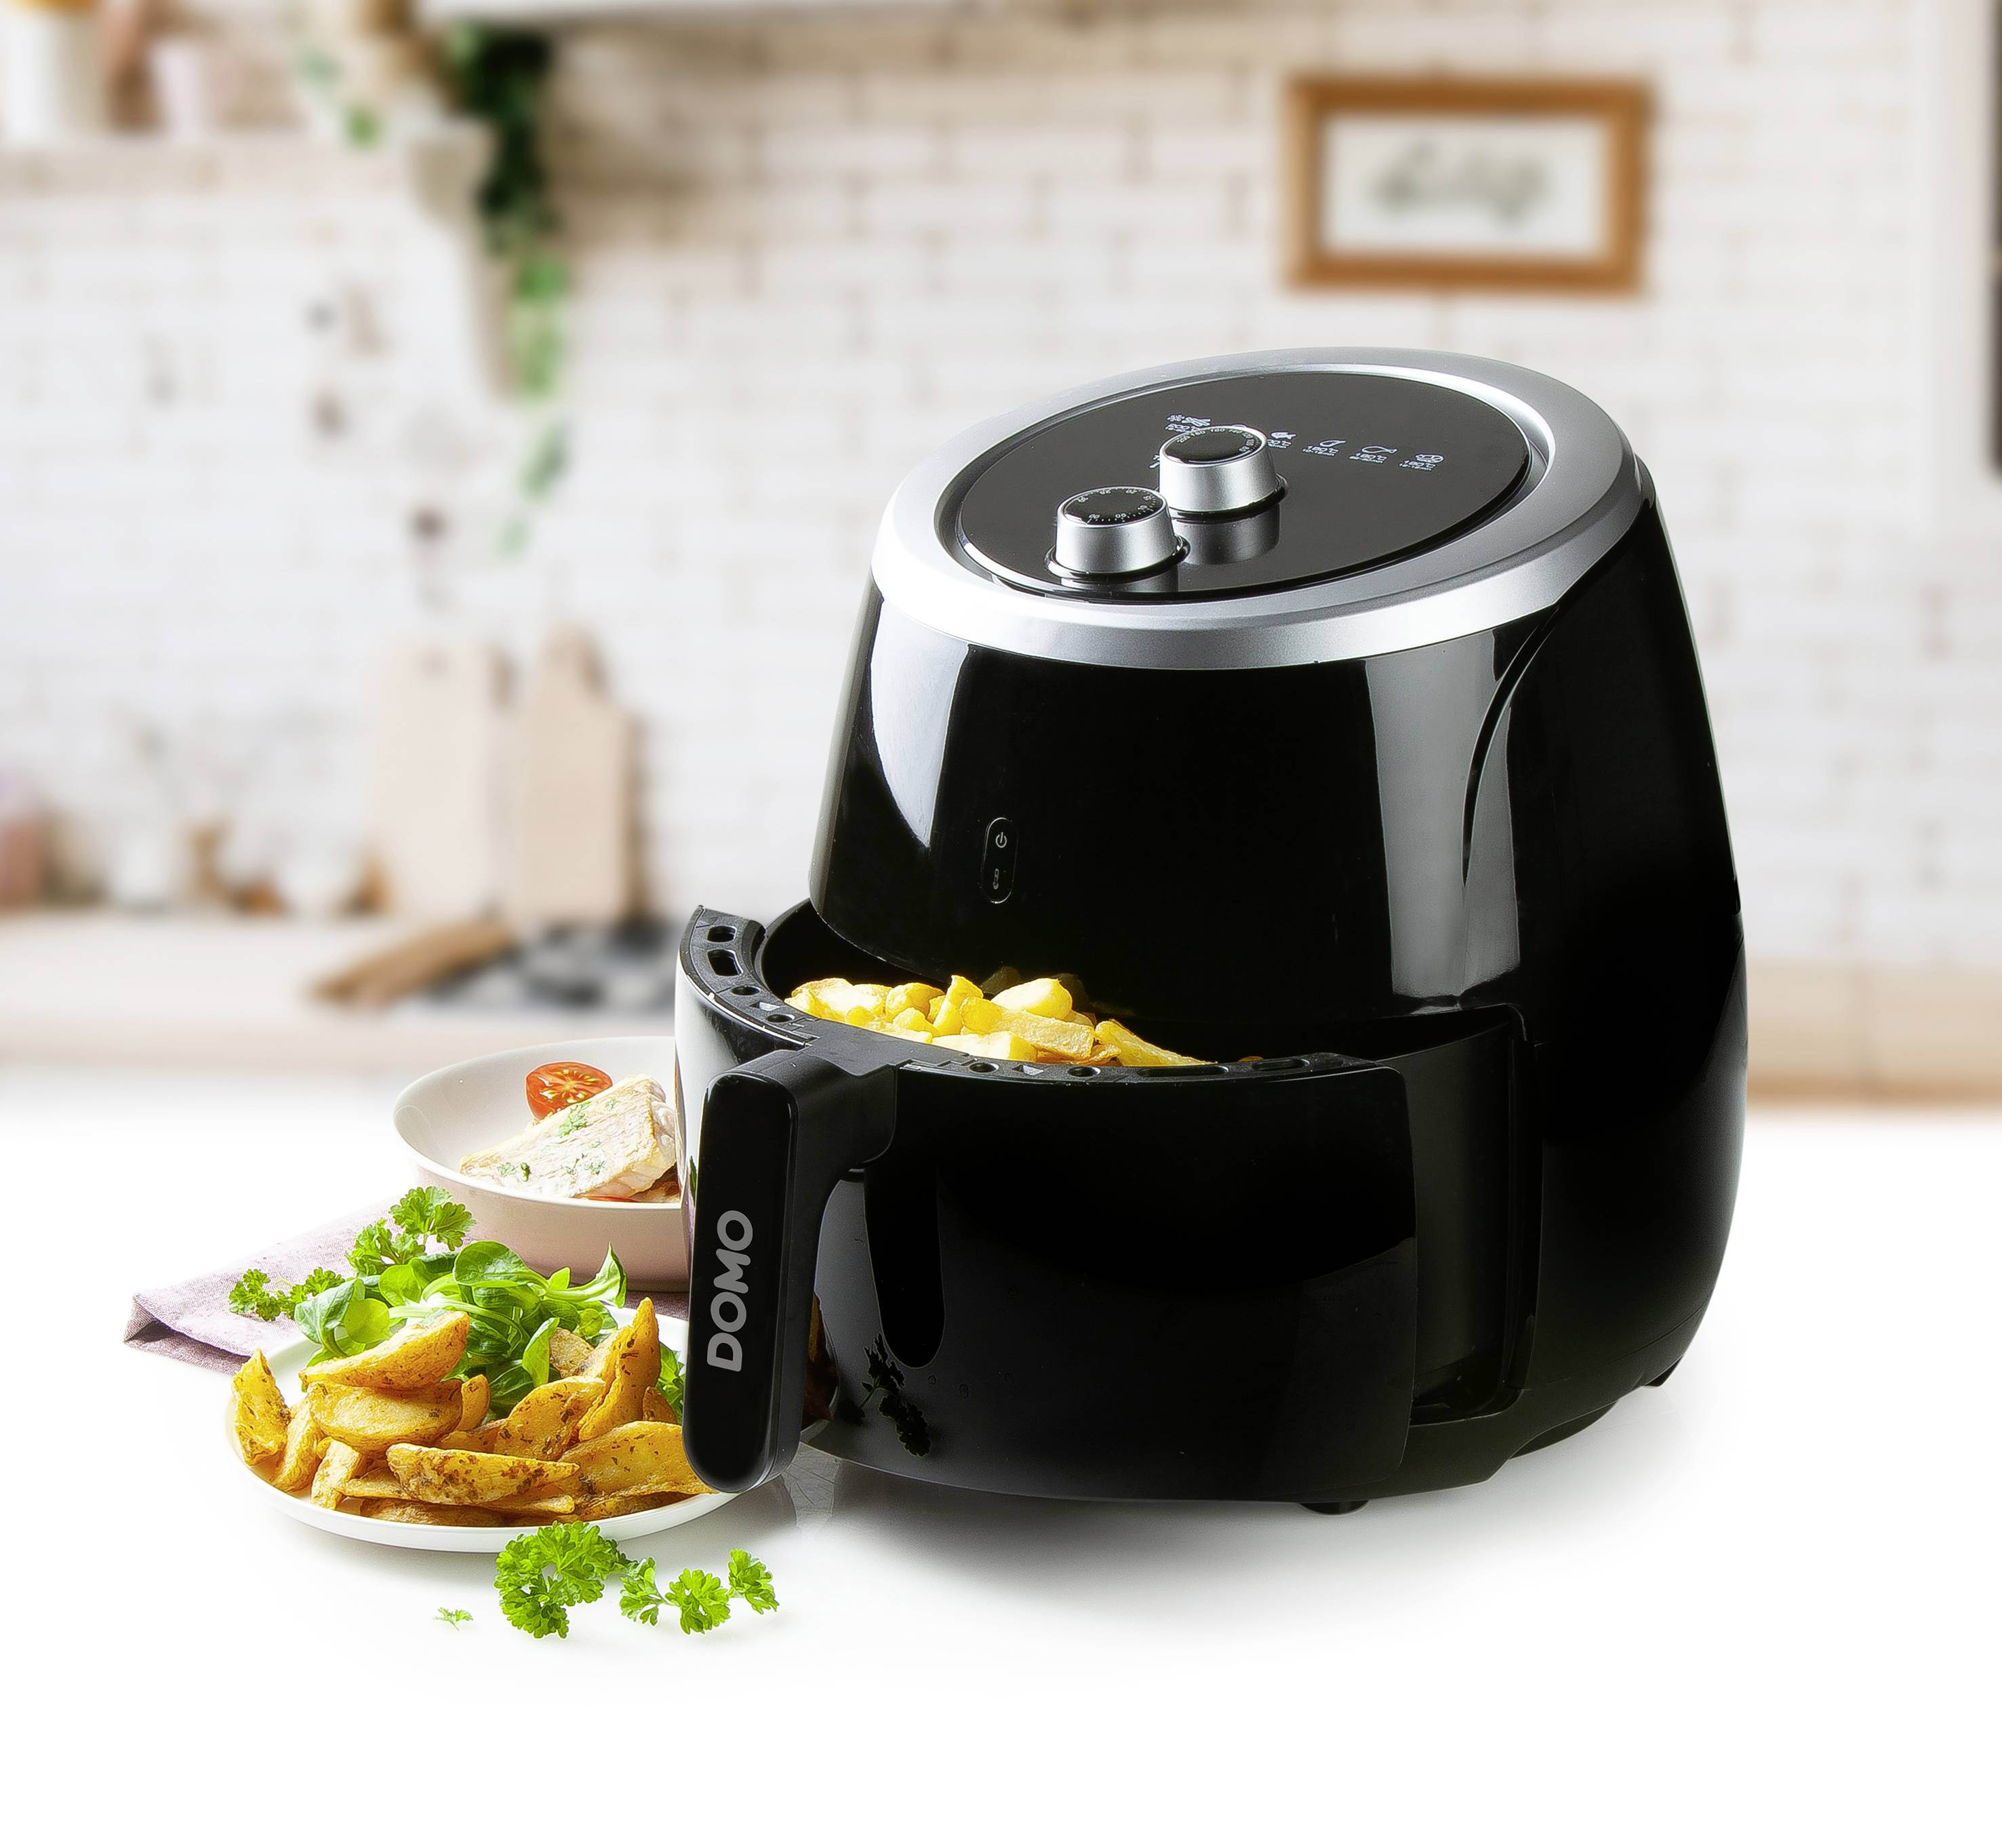 Svare Gå op og ned Fundament DOMO Deli-Freyer XXL Deep fryer Timer fuction, with display, Cool touch  housing, Non-stick coating, Overheat protection | Conrad.com